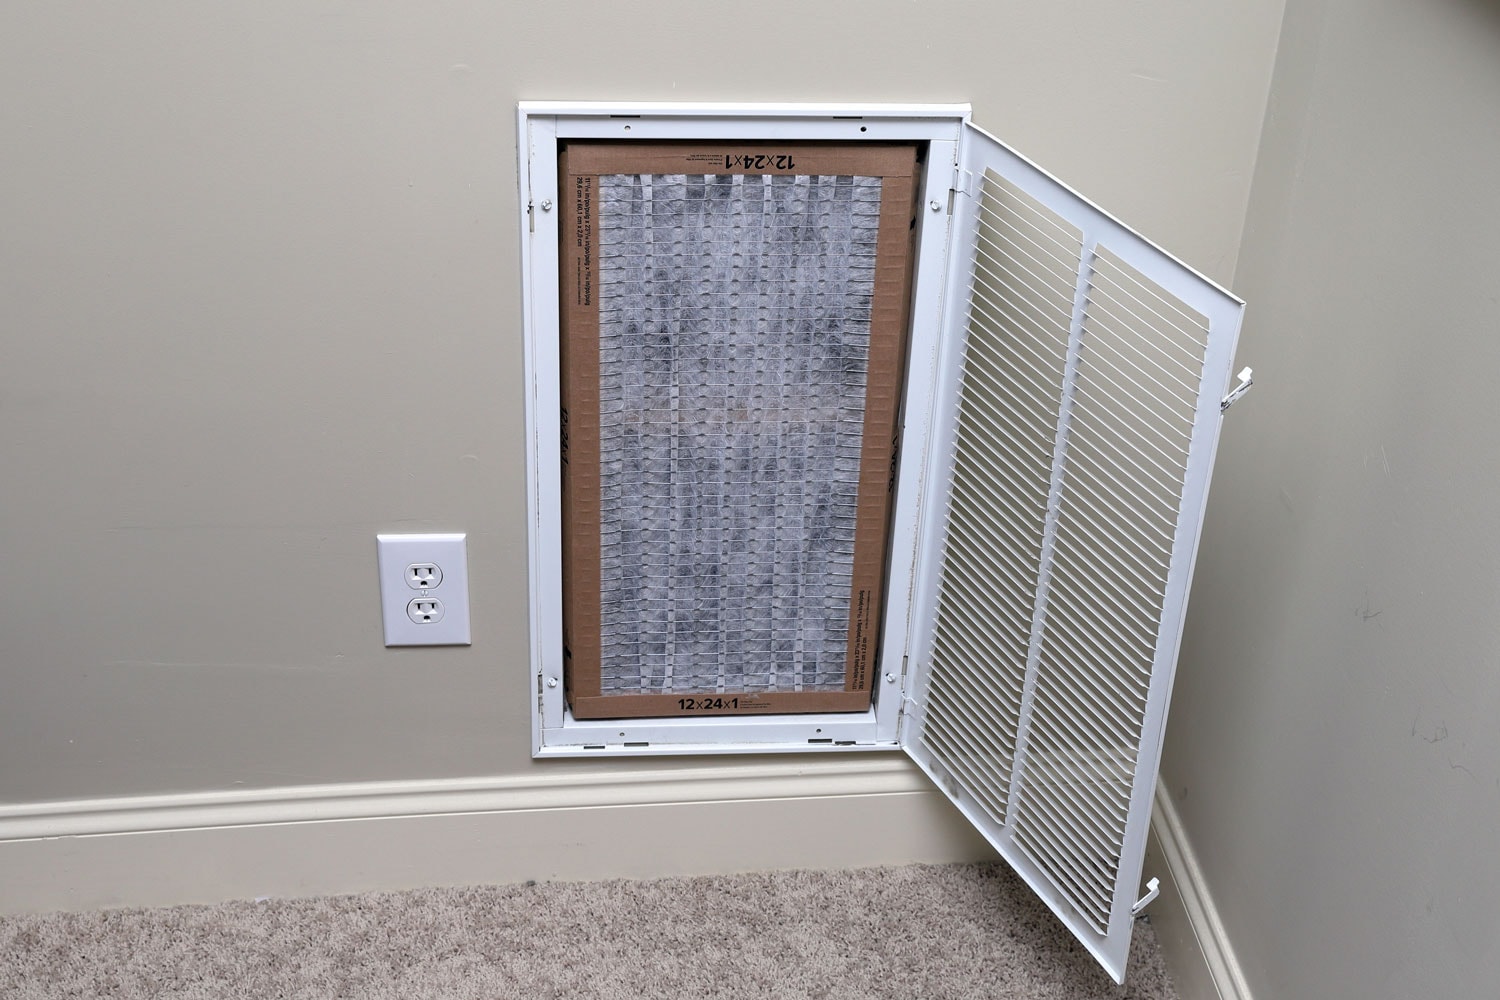 Central AC system air filter in need of replacement due to dirt accumulation